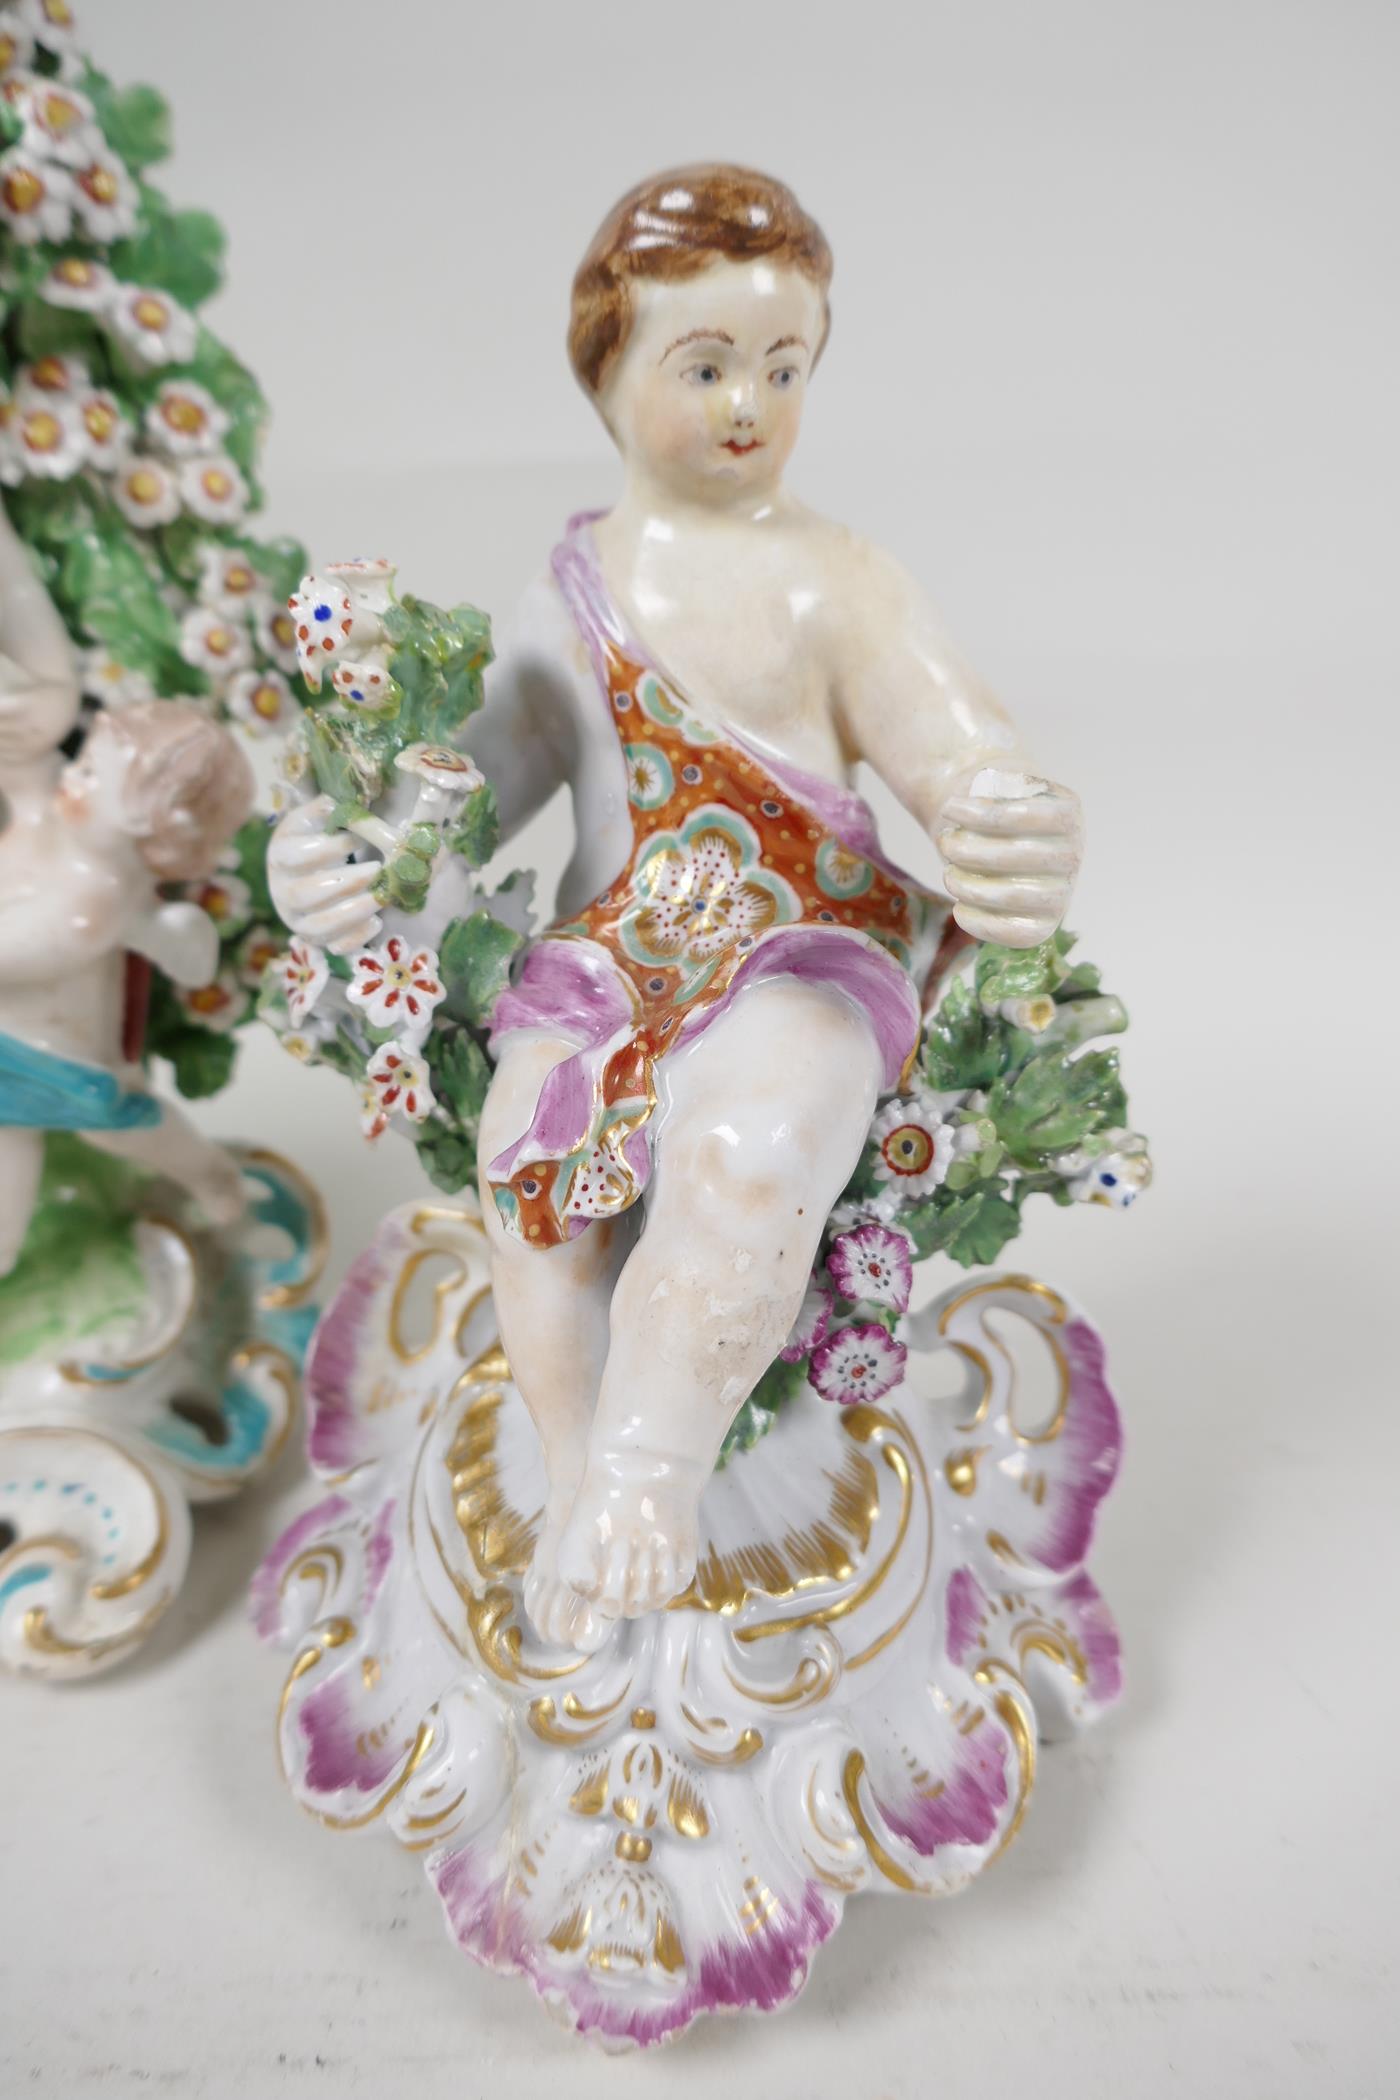 Three early English porcelain figures, a brocage figure of a woman and child (Chelsea) 8" high, a - Image 4 of 7